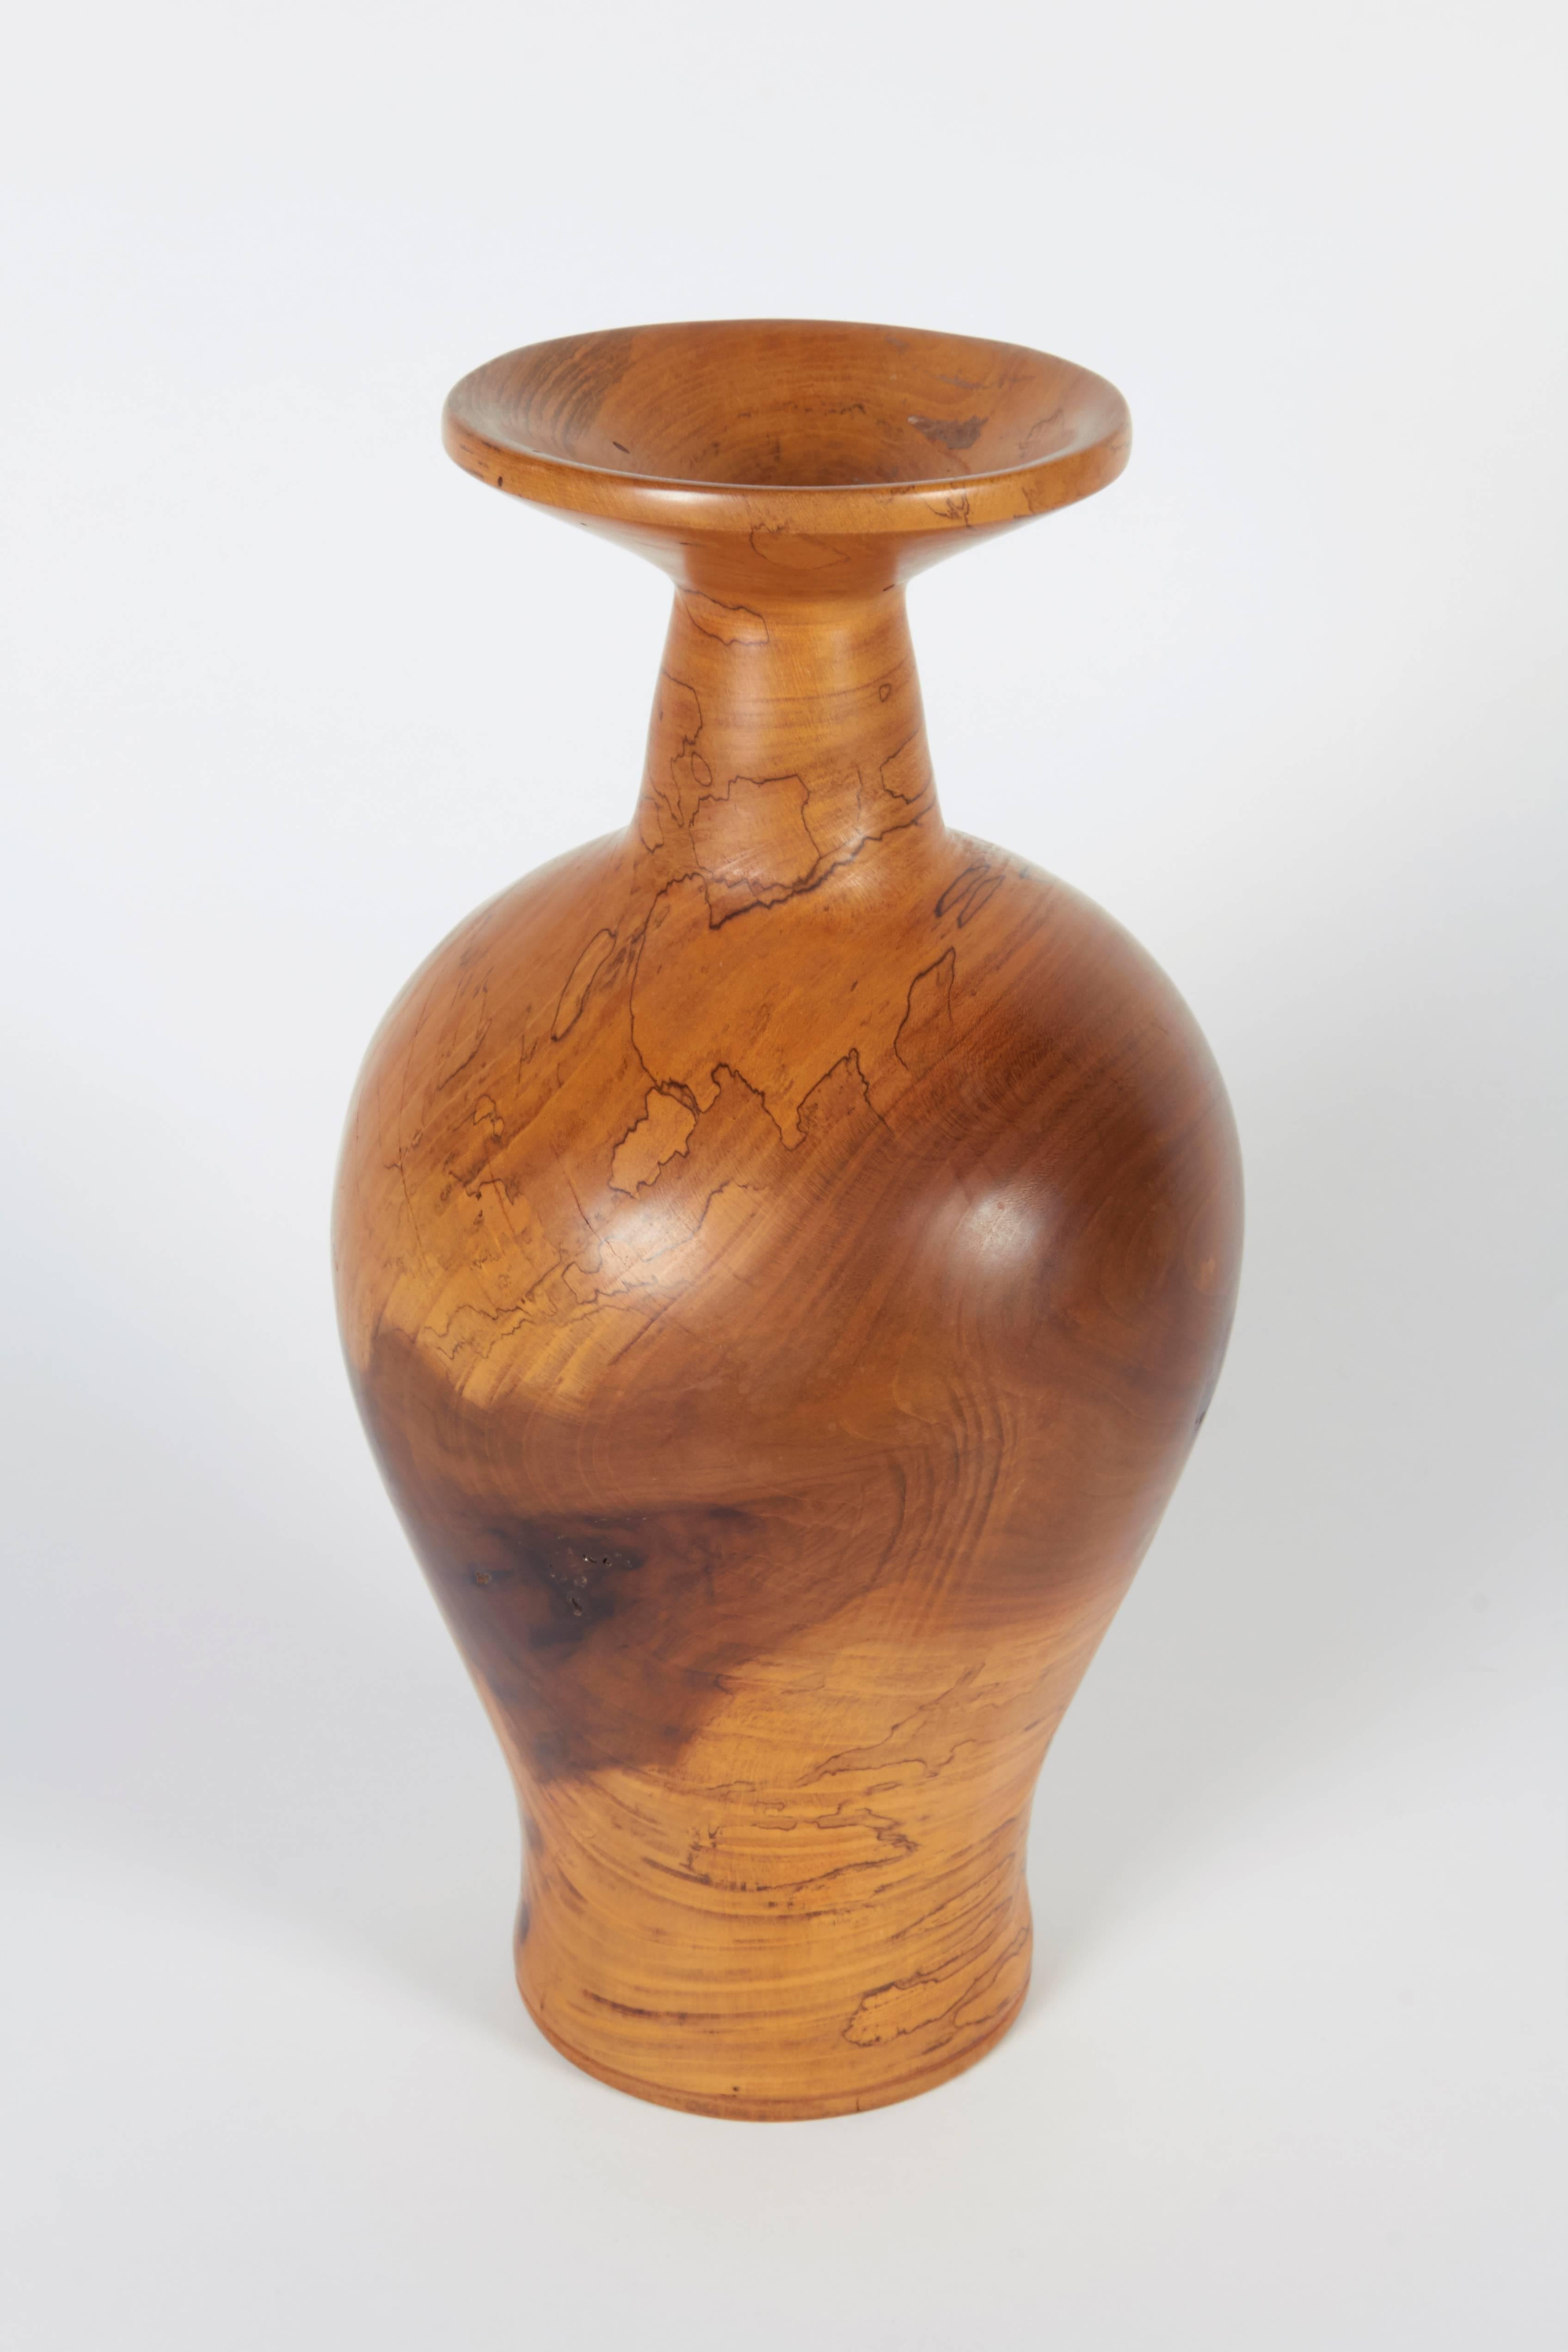 American Melvin Lindquist Spalted Magnolia Turned Vase, Signed & Dated 1986